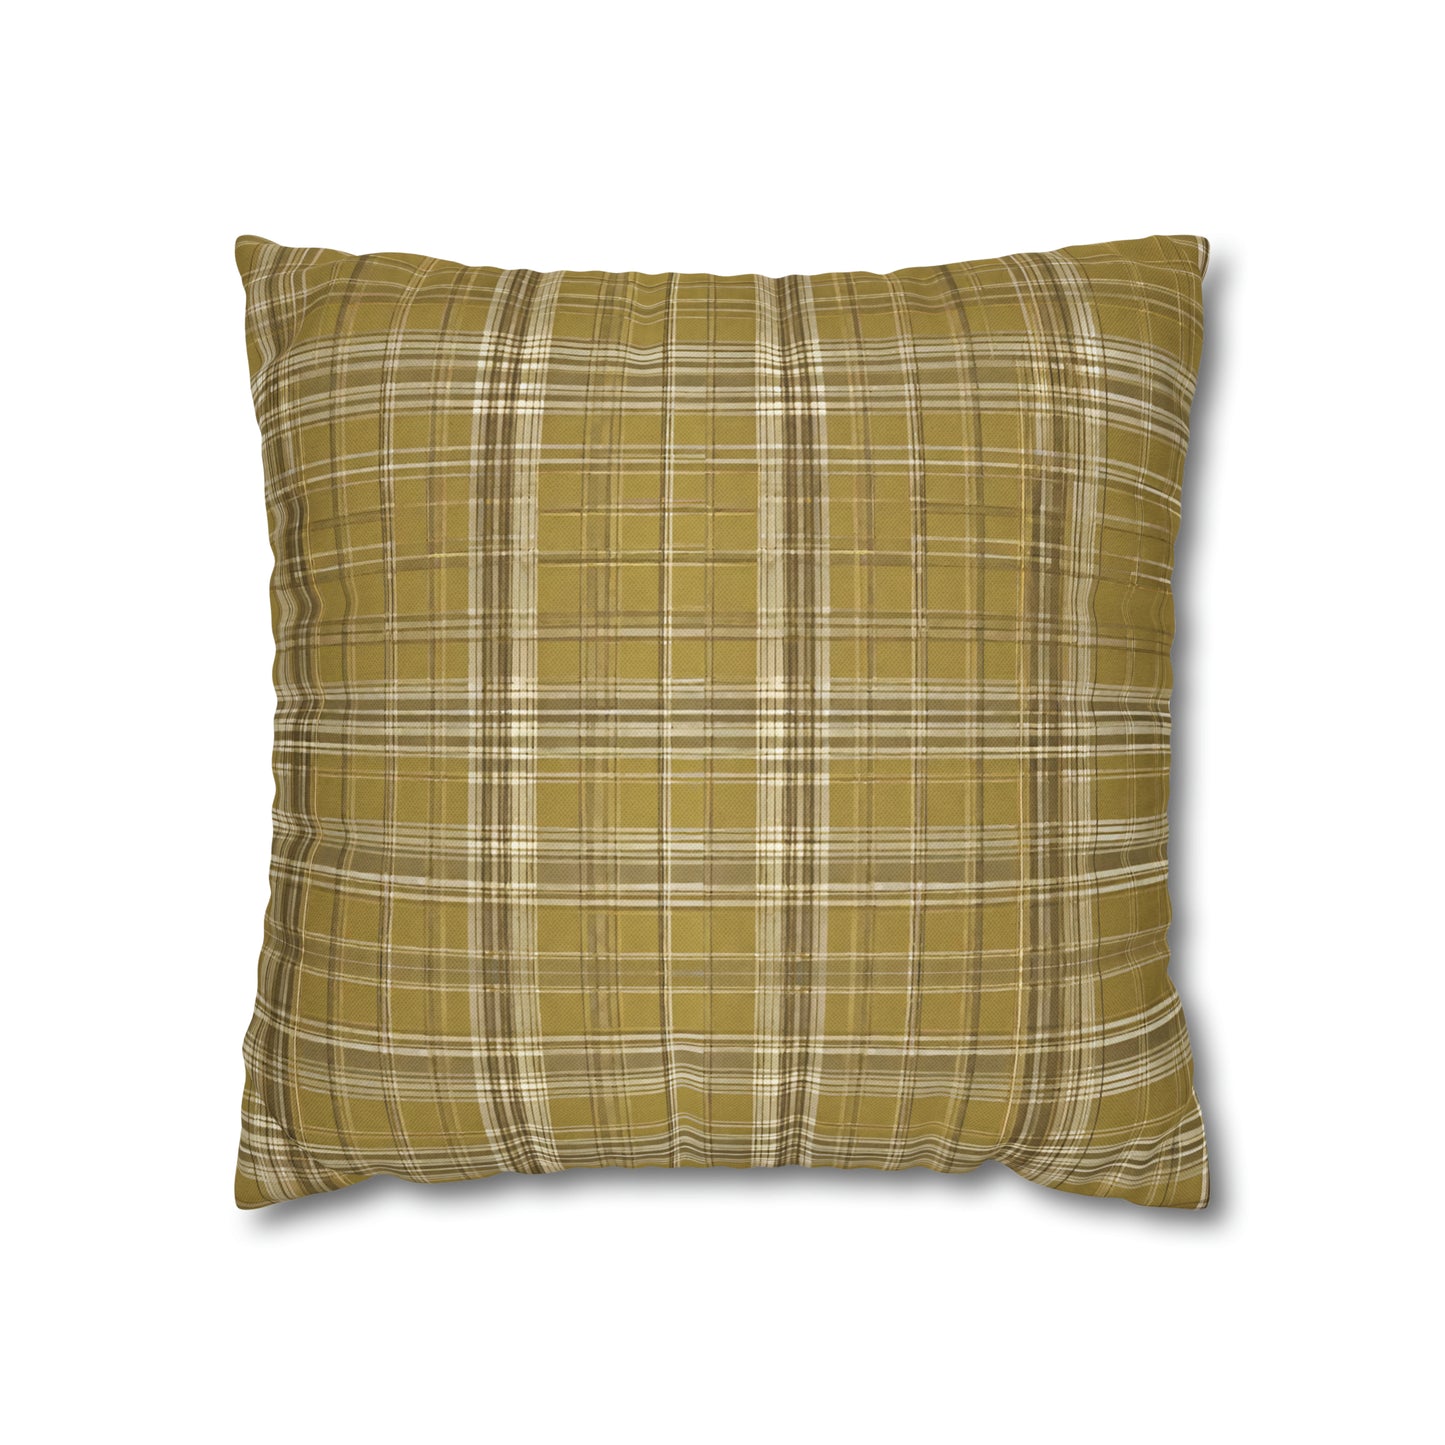 Gold And Cream Plaid Throw Pillow Cover